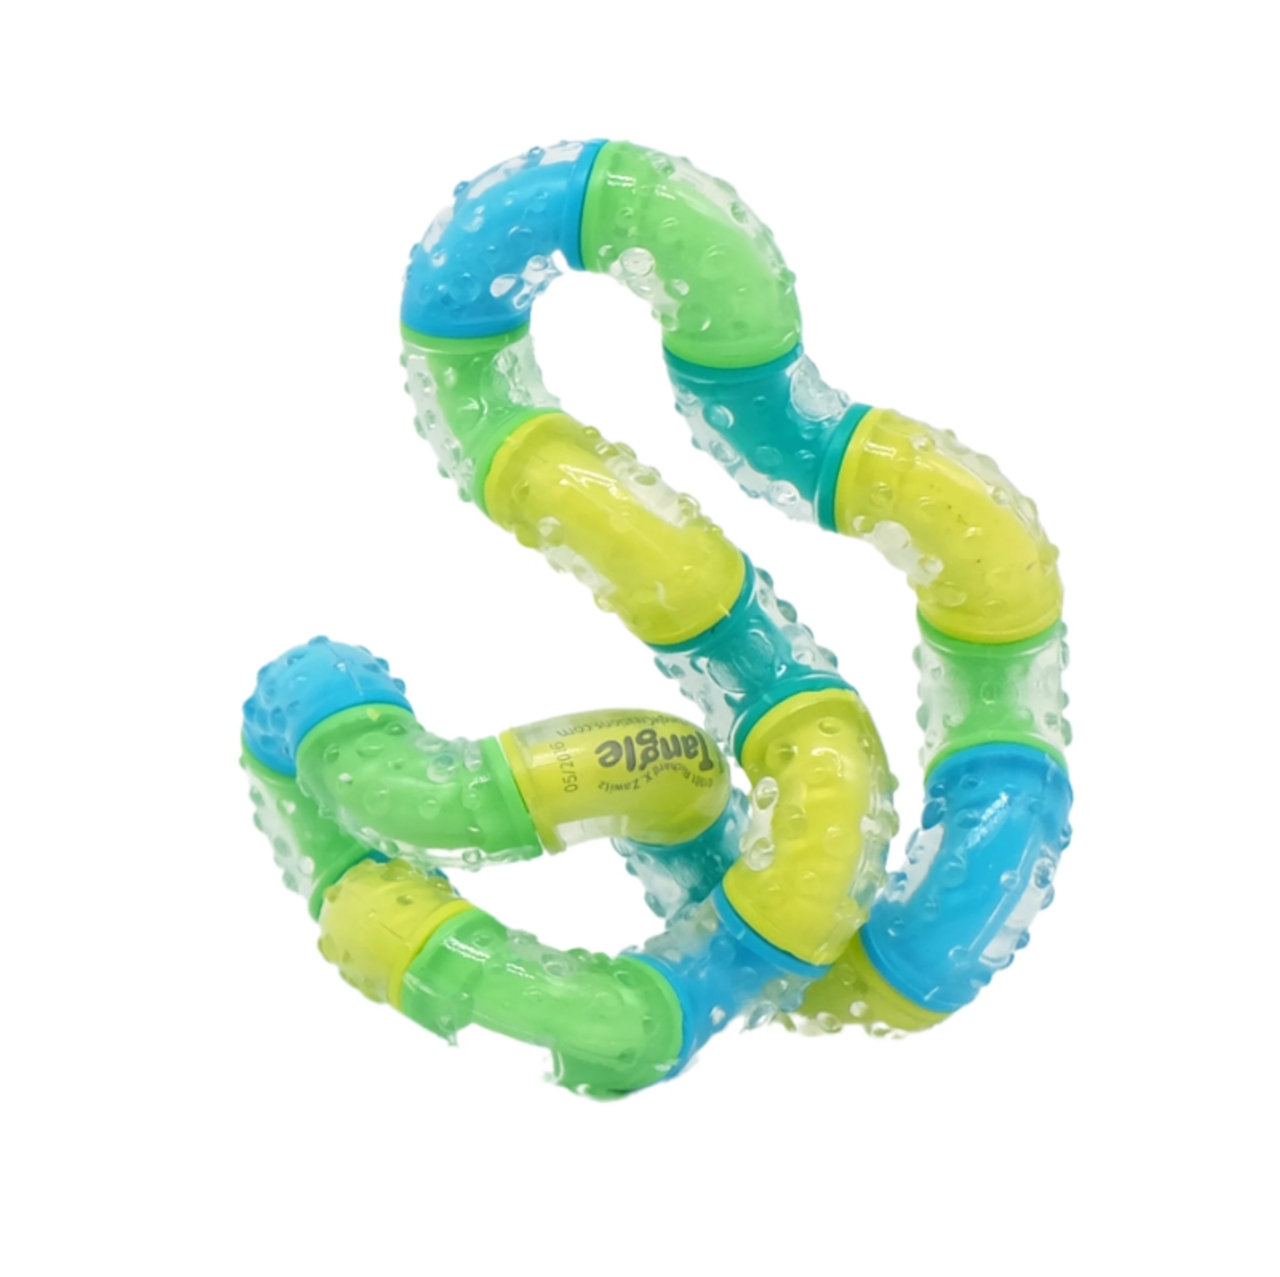 Artiest Arbeid Beschuldigingen Tangle Therapy a Multi-Sensory Fidget for Students with Autism